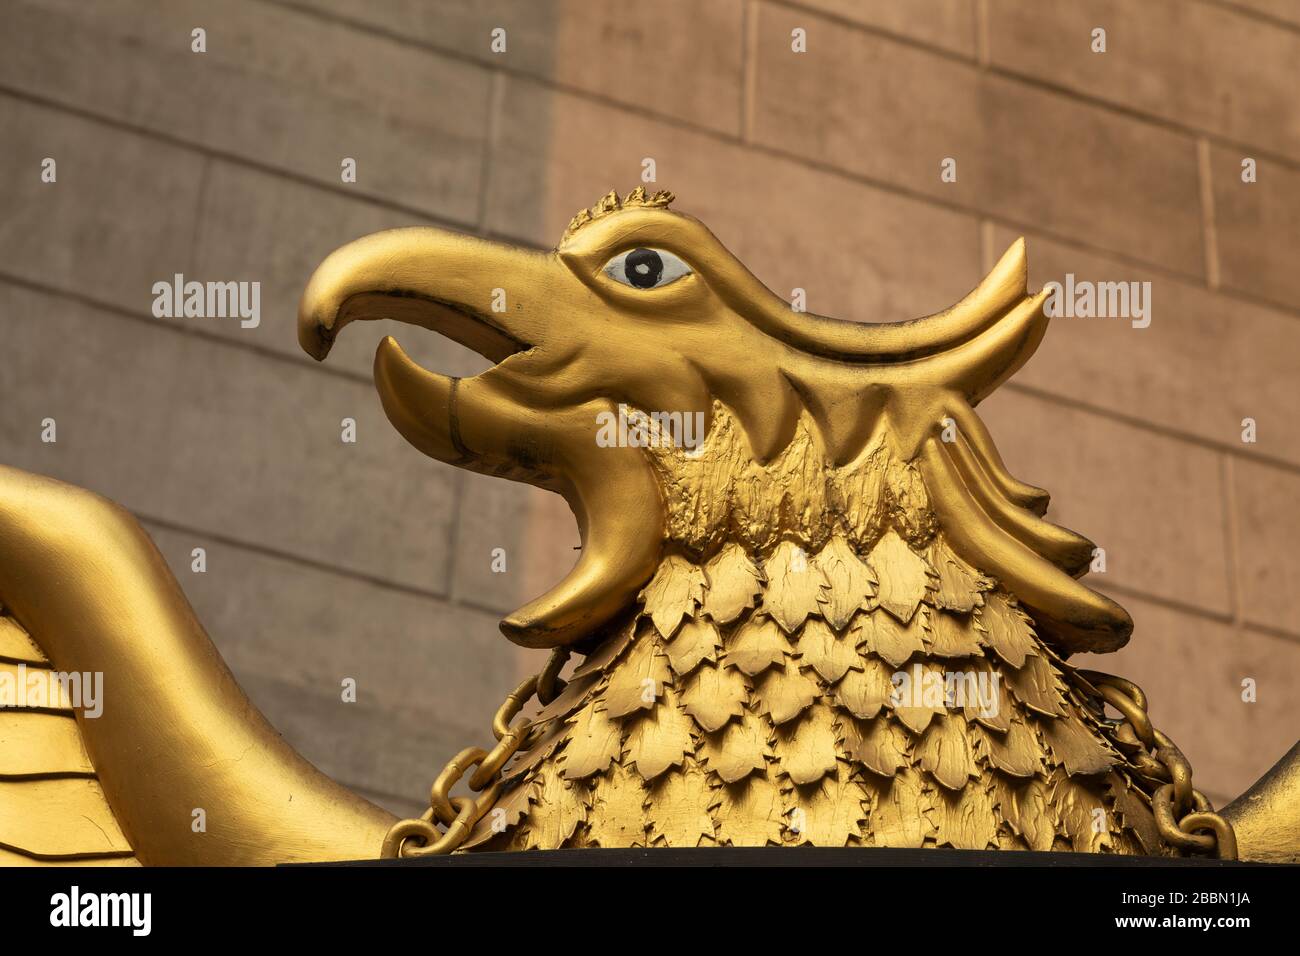 Jakarta, Indonesia - July 13, 2019: Close-up of Garuda, holding the shield and symbol of Indonesia, in the Cathedral of Our Lady of the Assumption. Stock Photo